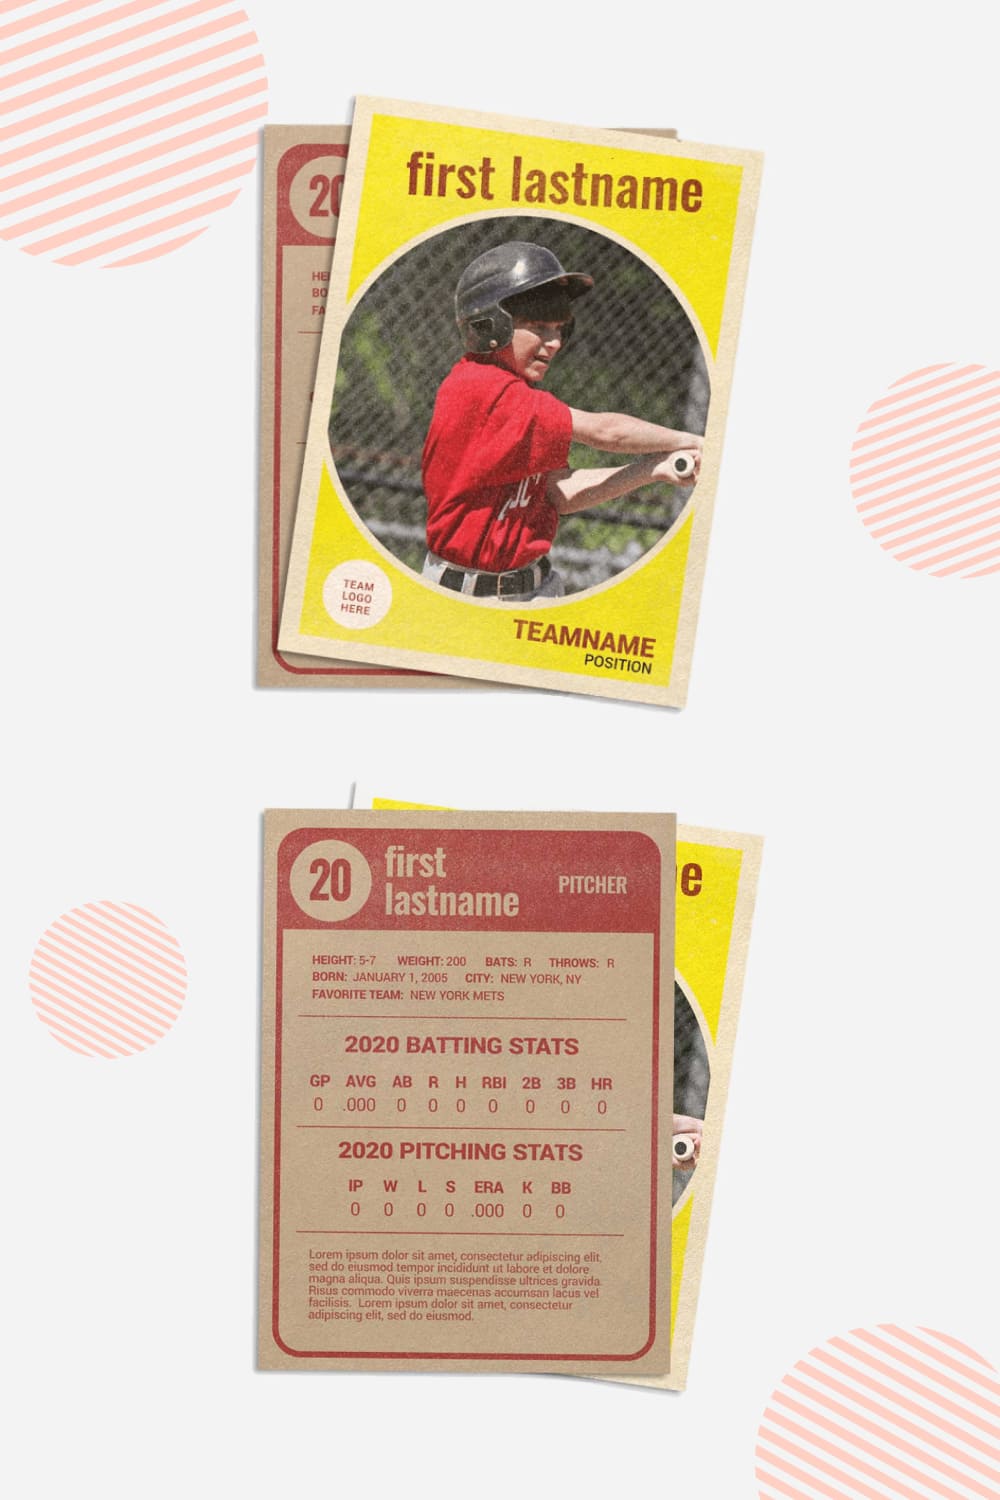 Collage of vintage cards with photos and information about baseball players.